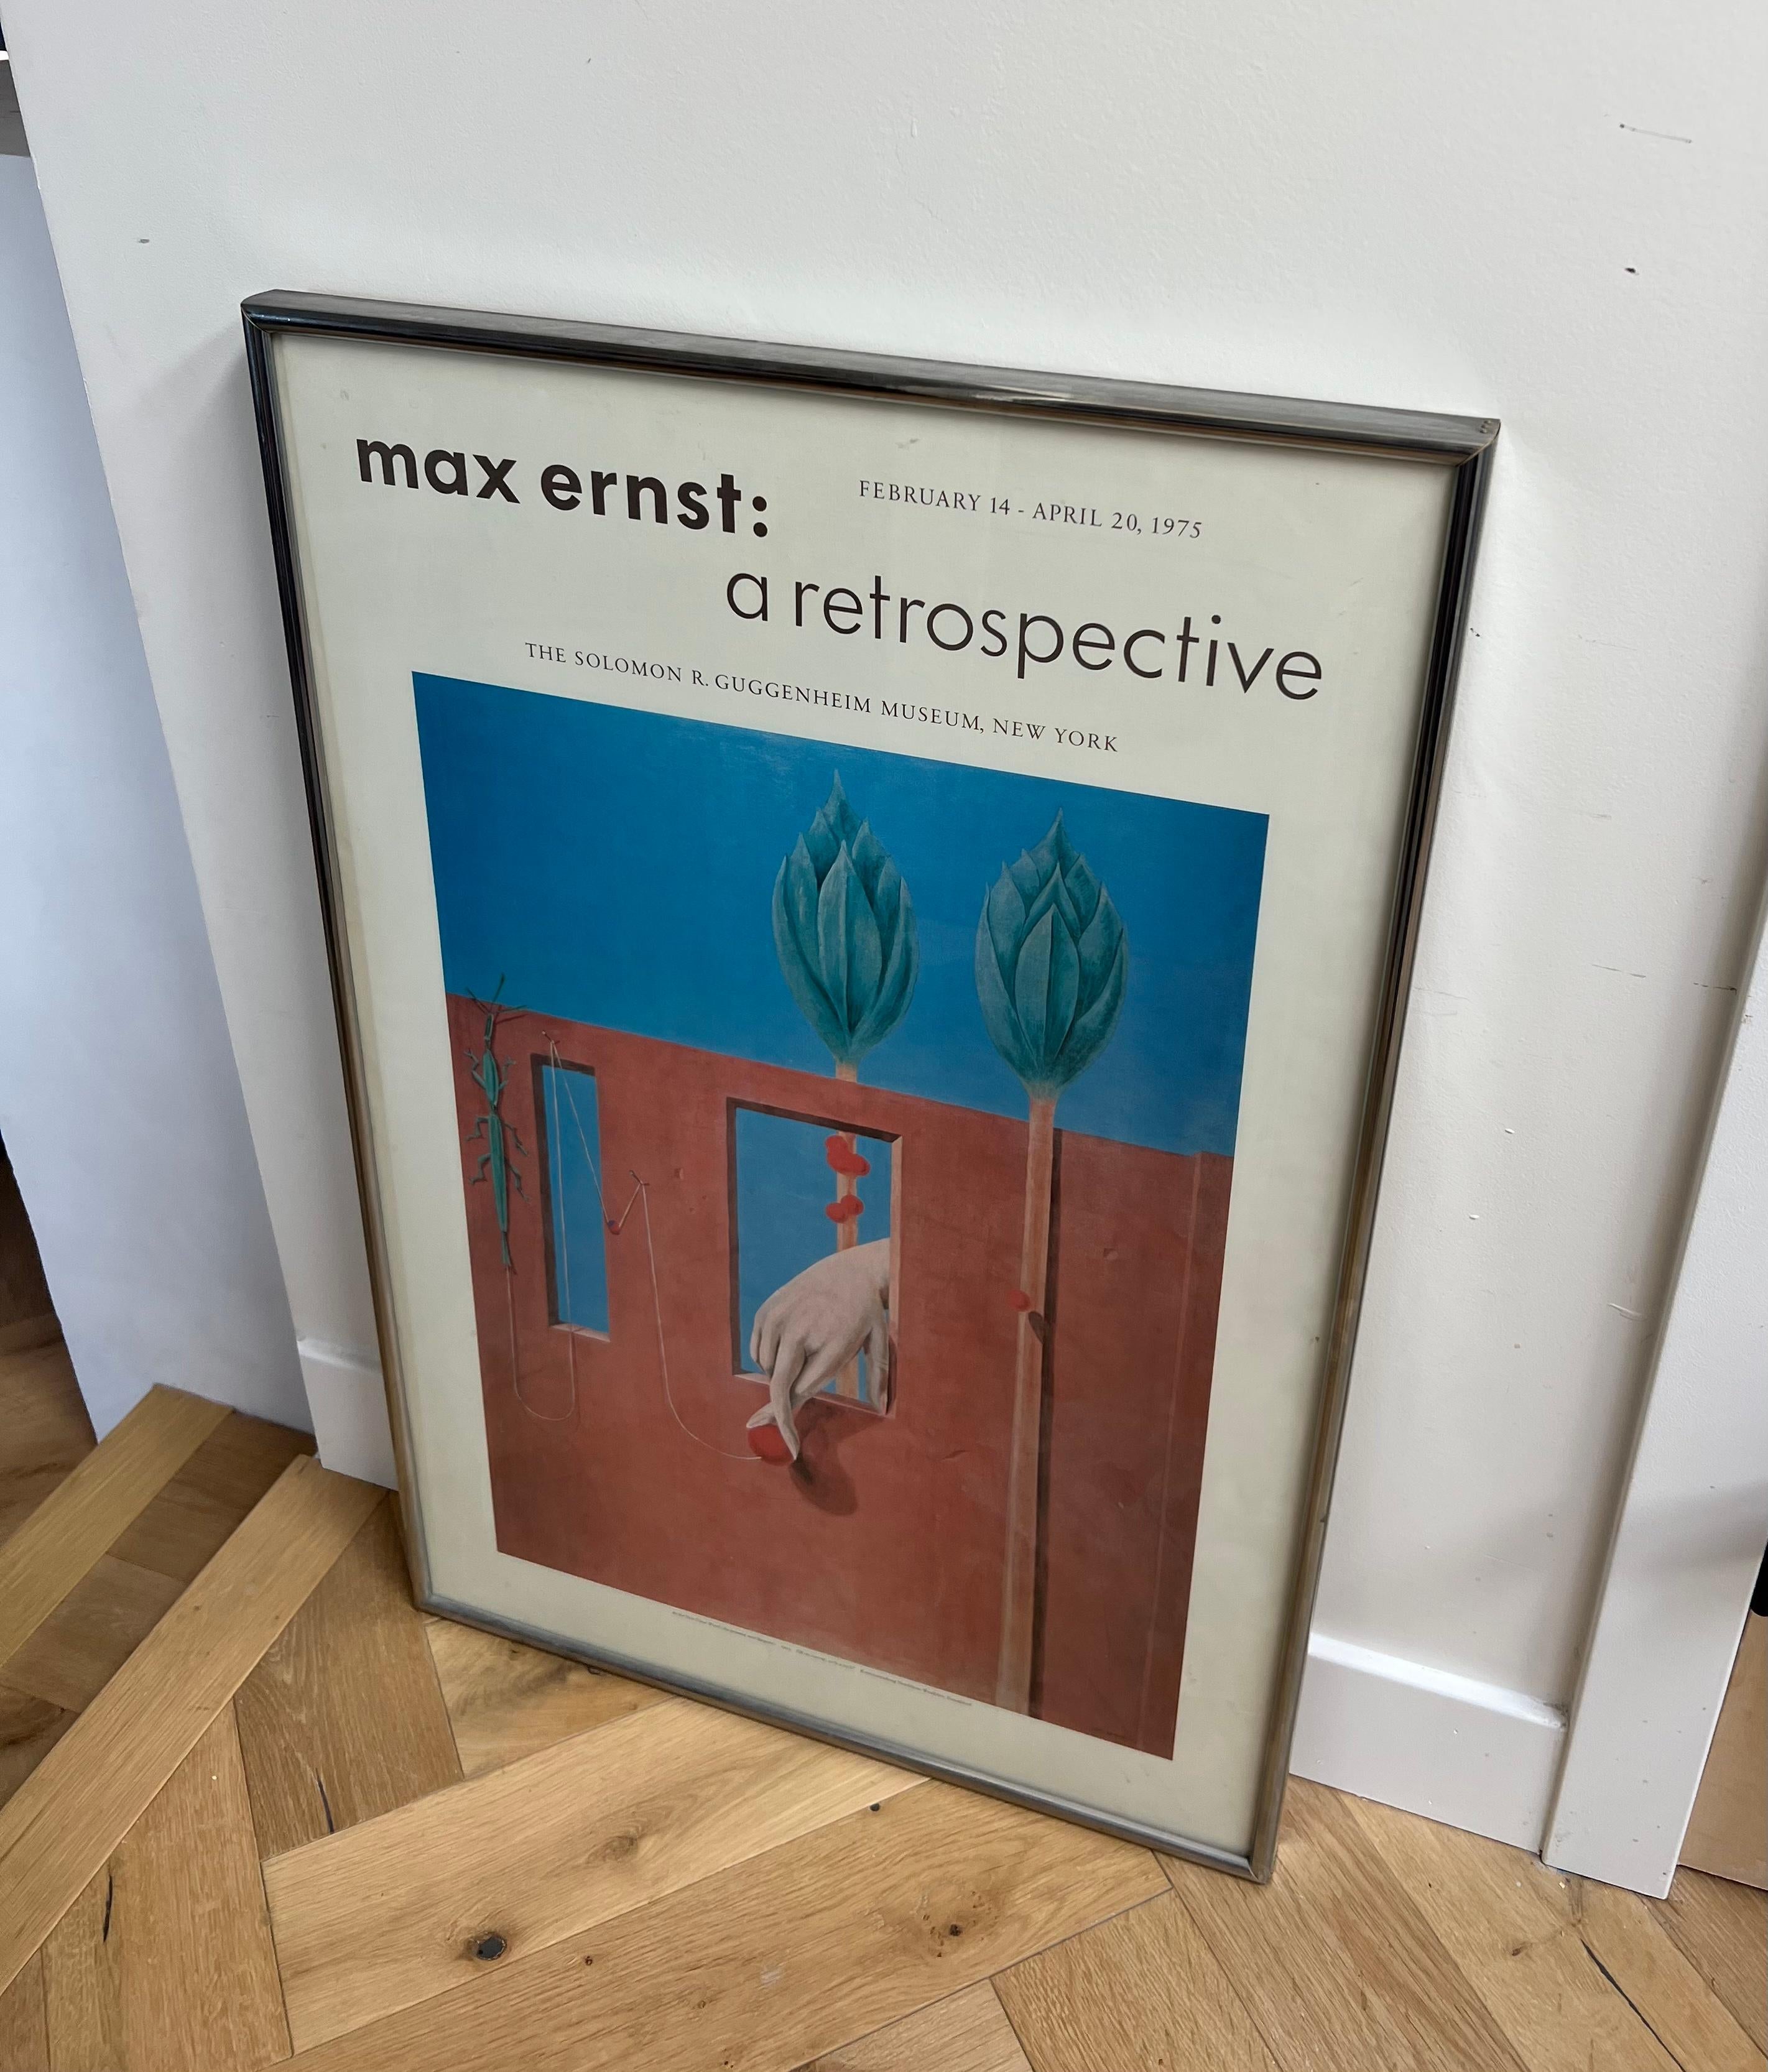 An original exhibition poster from the Solomon R Guggenheim museum in New York City: “Max Ernst: a Retrospective.” From 1975. This poster showcases the artist’s work “At the First Clear Word” (Au Premier Mot Limpide), oil on canvas, 1923. Having